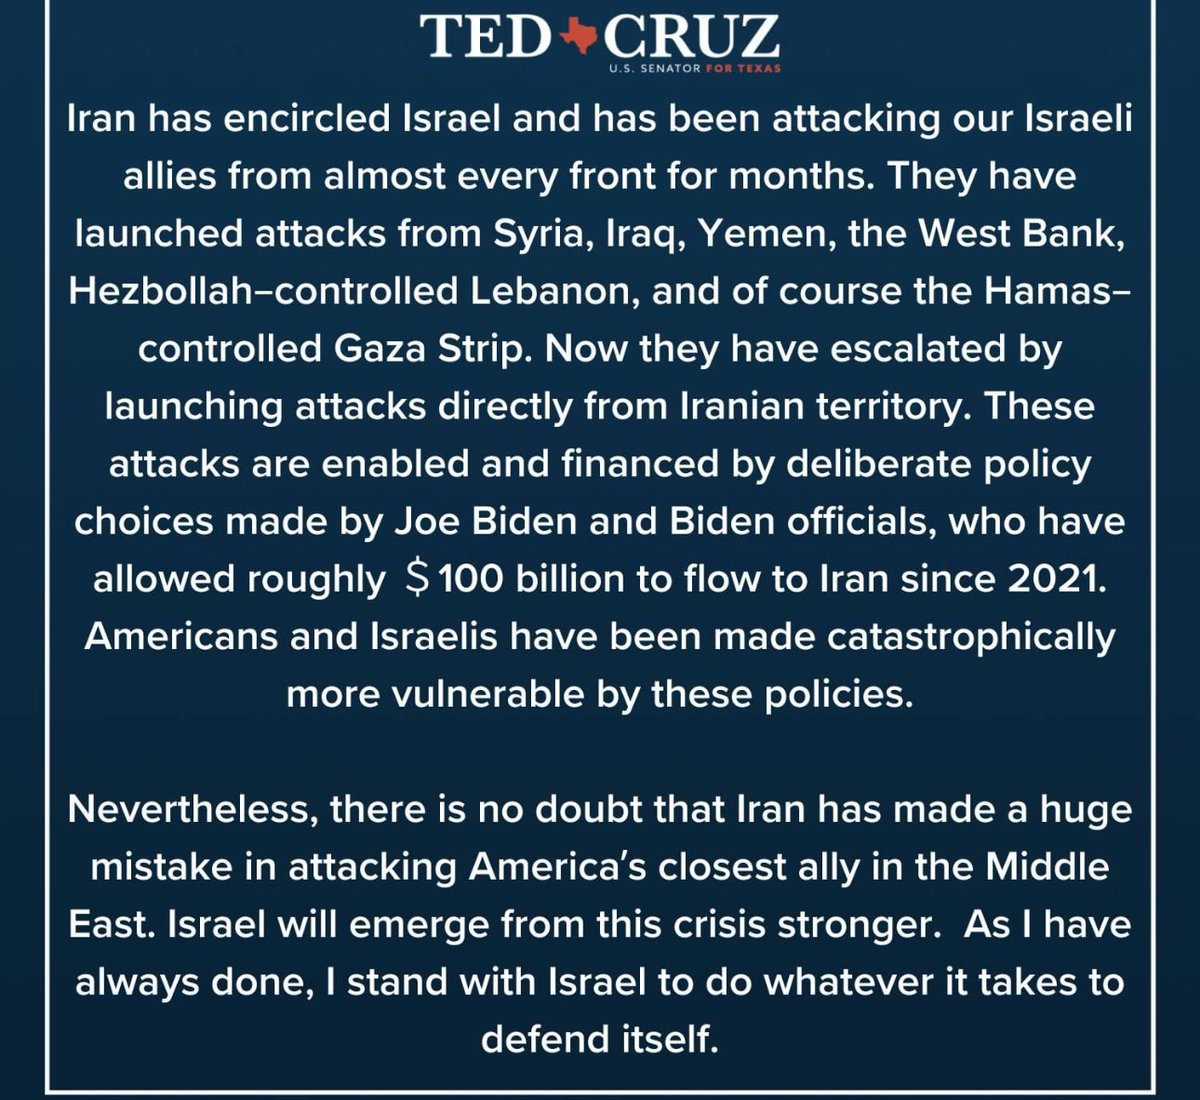 .@SenTedCruz: “These attacks are enabled and financed by deliberate policy choices made by Joe Biden and Biden officials, who have allowed roughly $100 billion to flow to Iran”